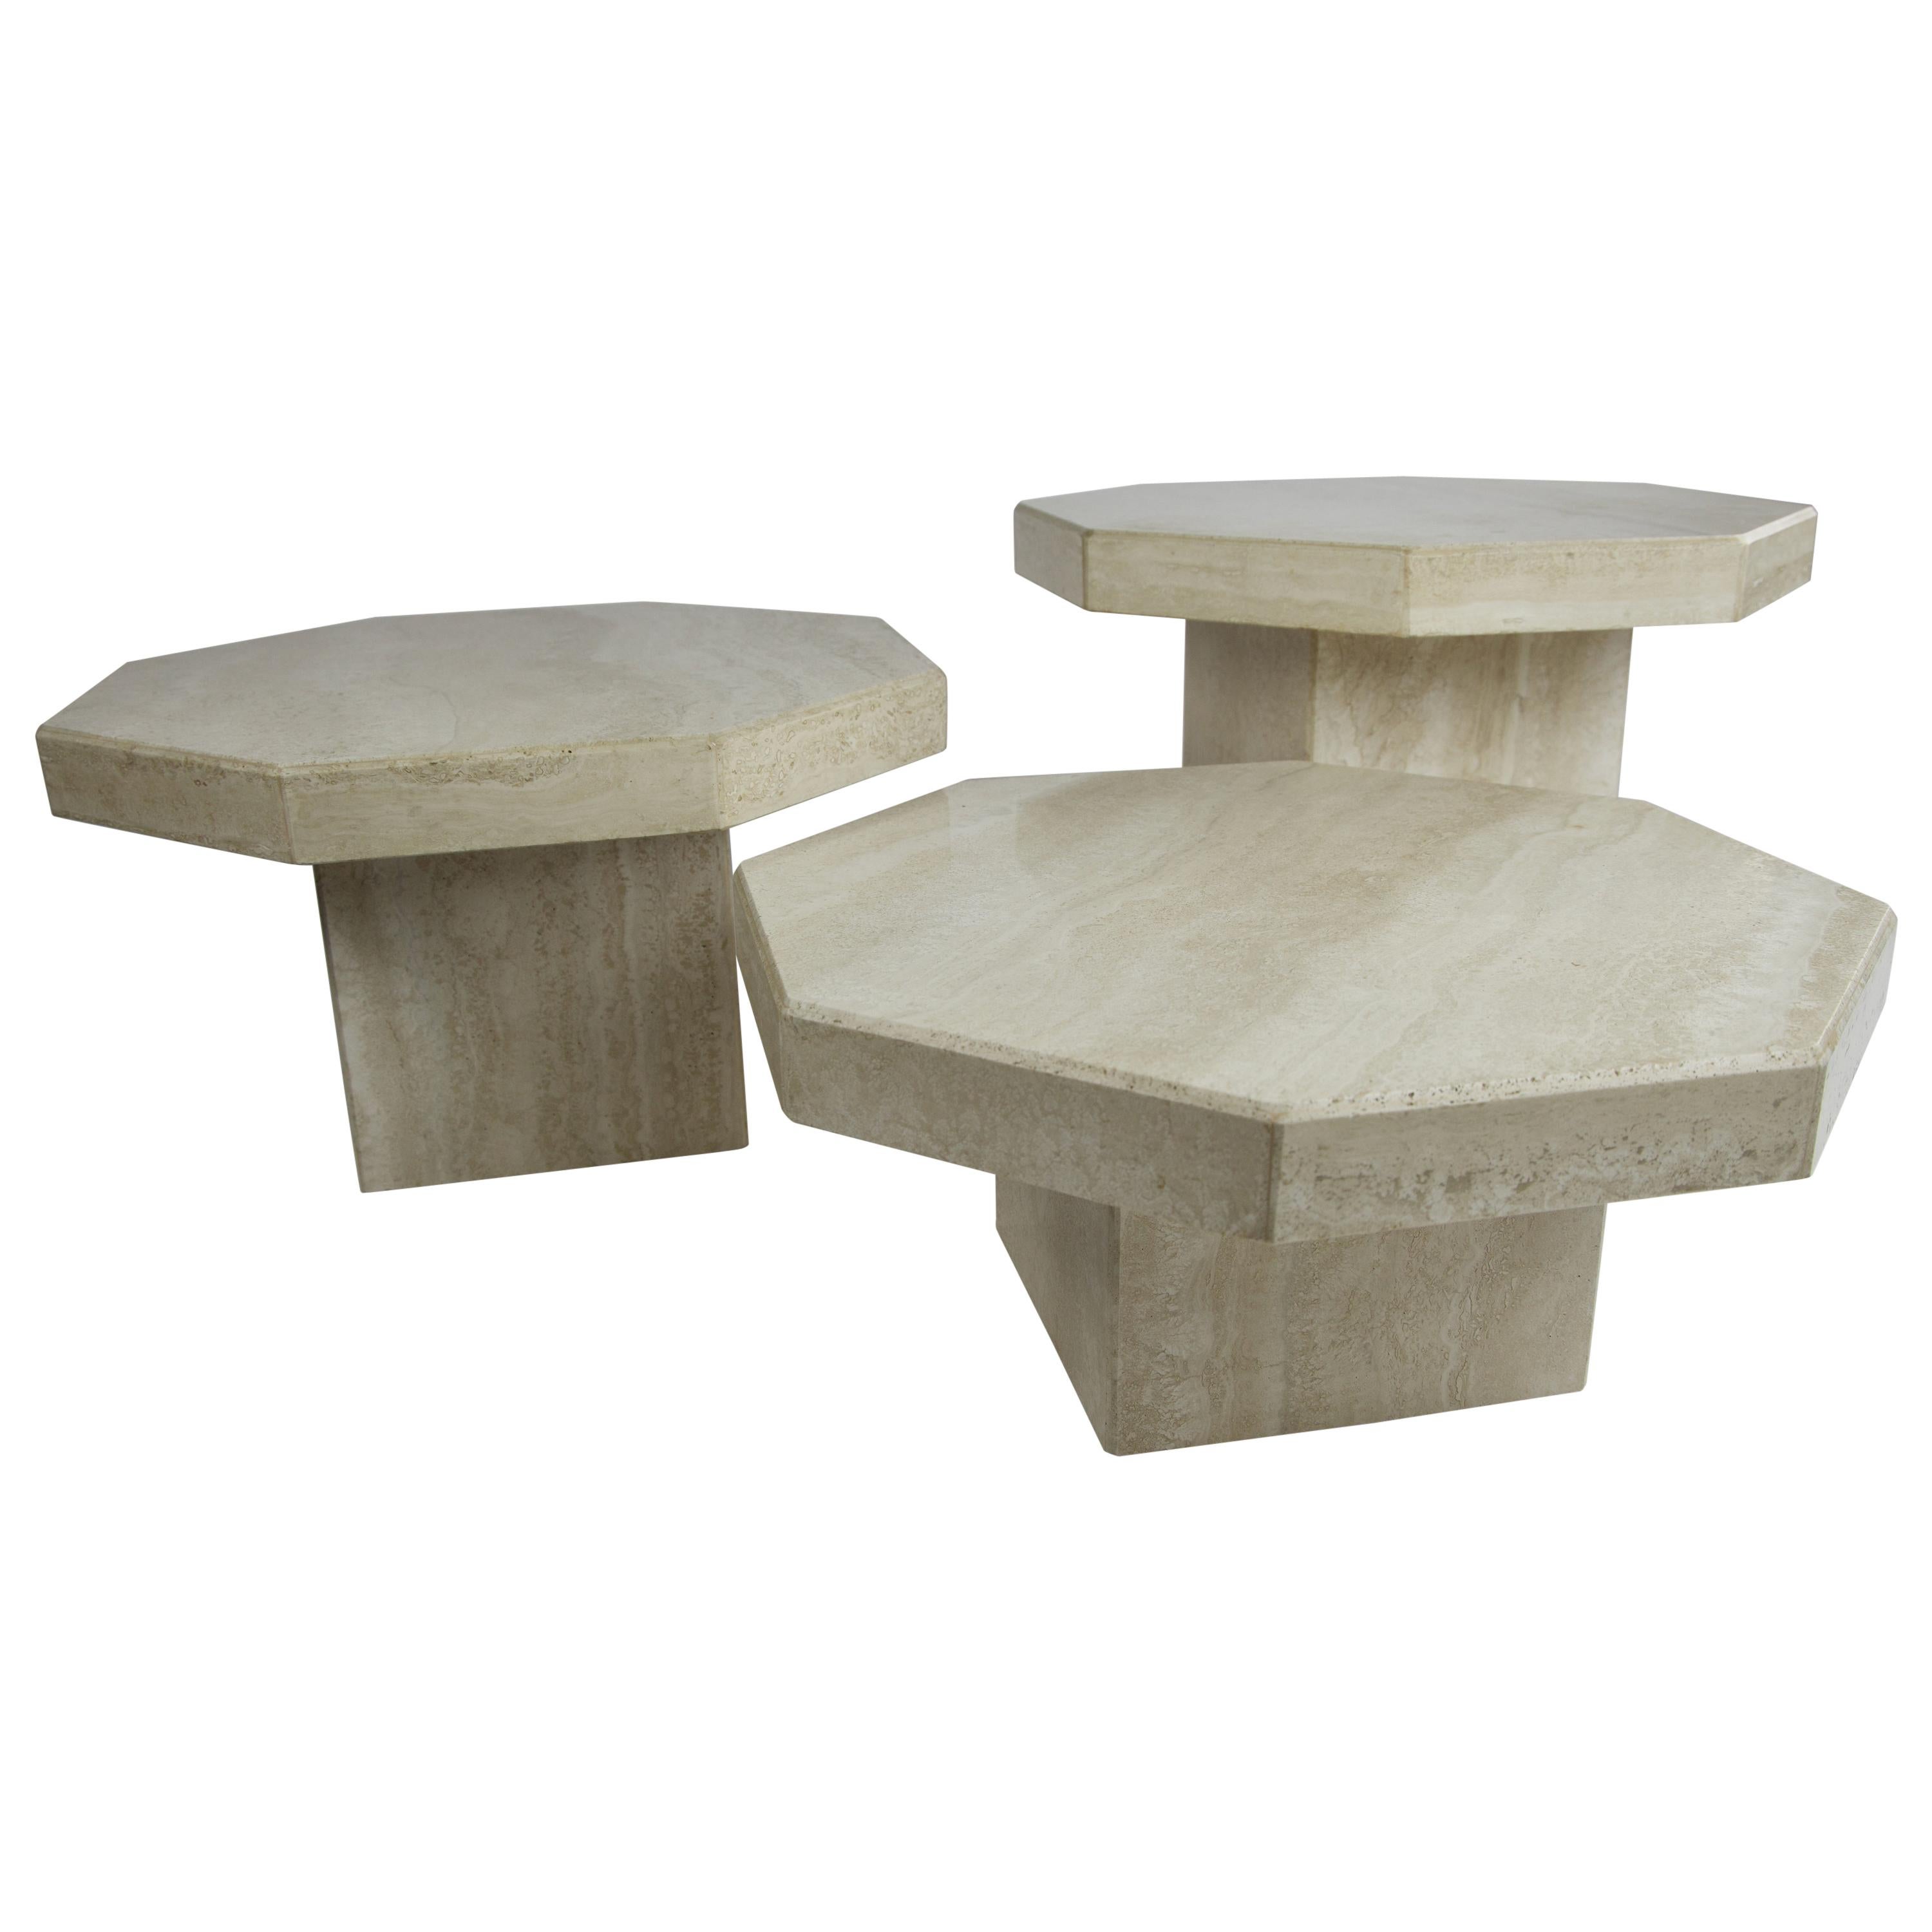 Octagon Travertine Nesting Tables, by Up & Up